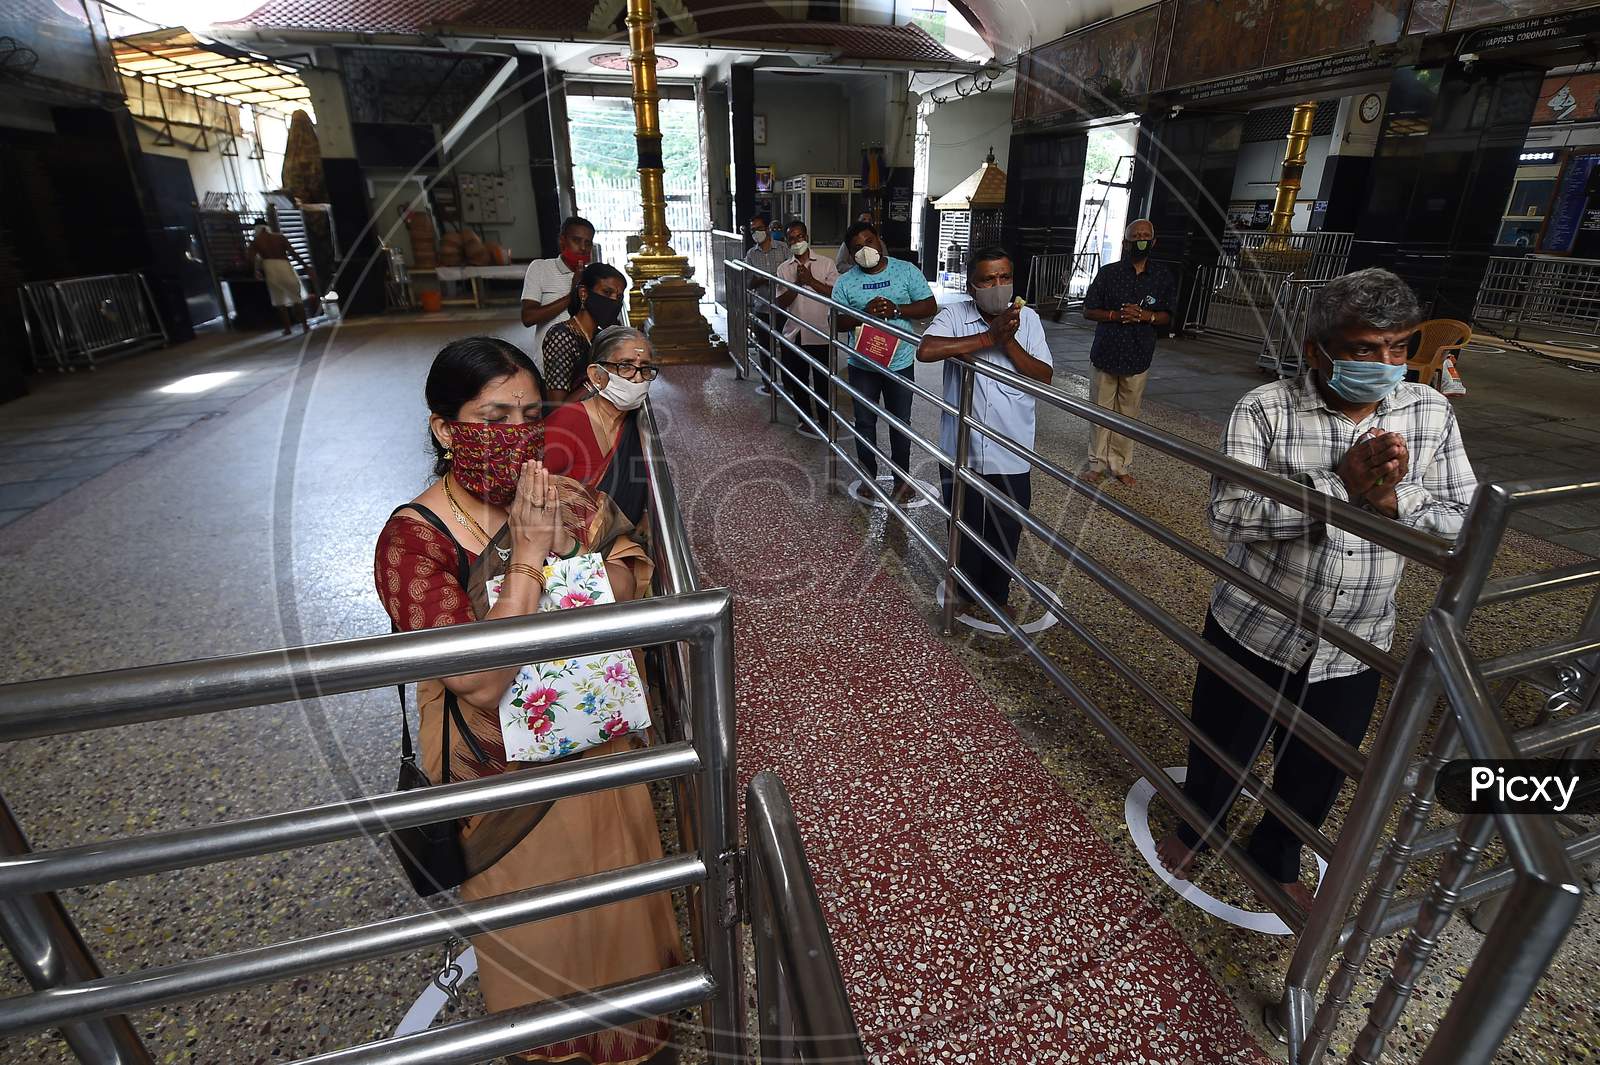 Devotees Queue Maintaining Social Distancing At A Temple As The Government Eased A Nationwide Lockdown Imposed As A Preventive Measure Against The Covid-19 Coronavirus, In Chennai On September 1, 2020.